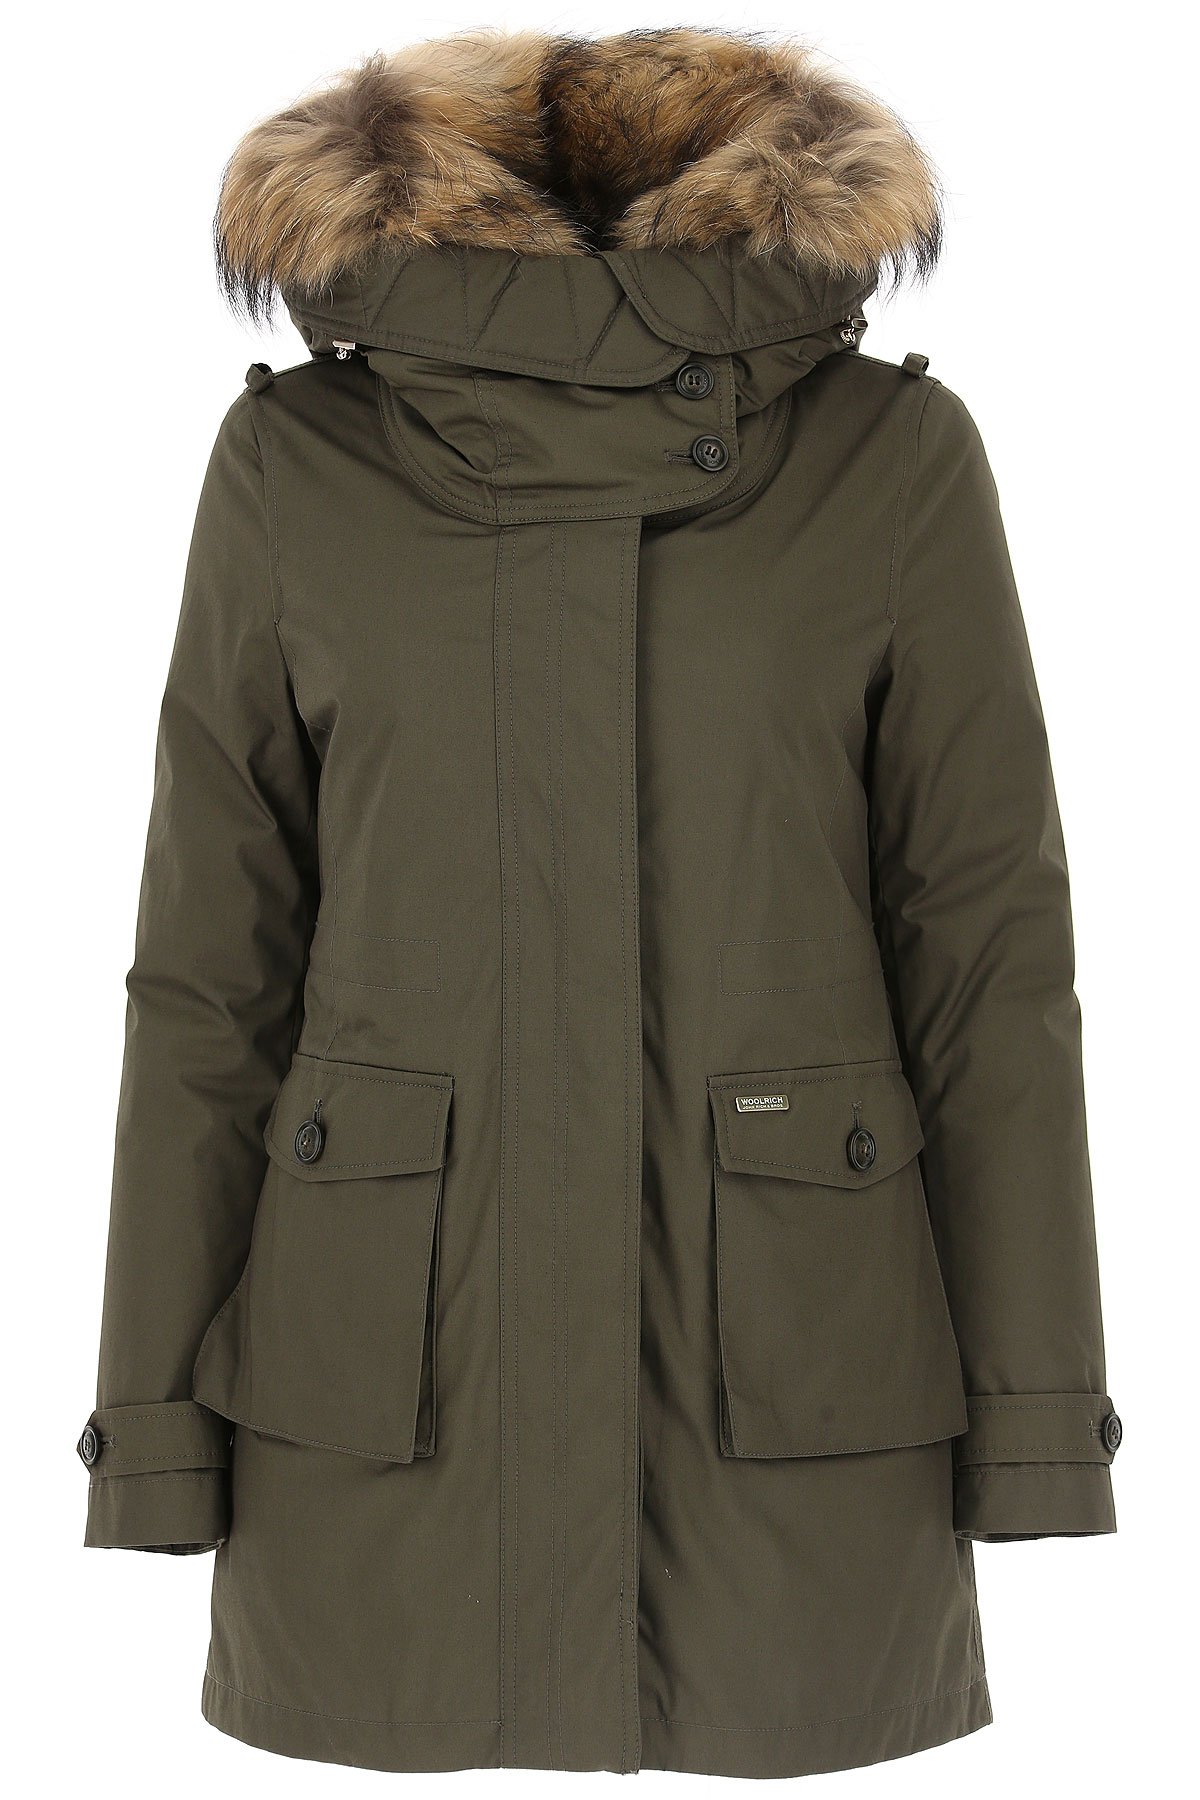 Womens Clothing Woolrich, Style code: wwcps2685-lm10-6992